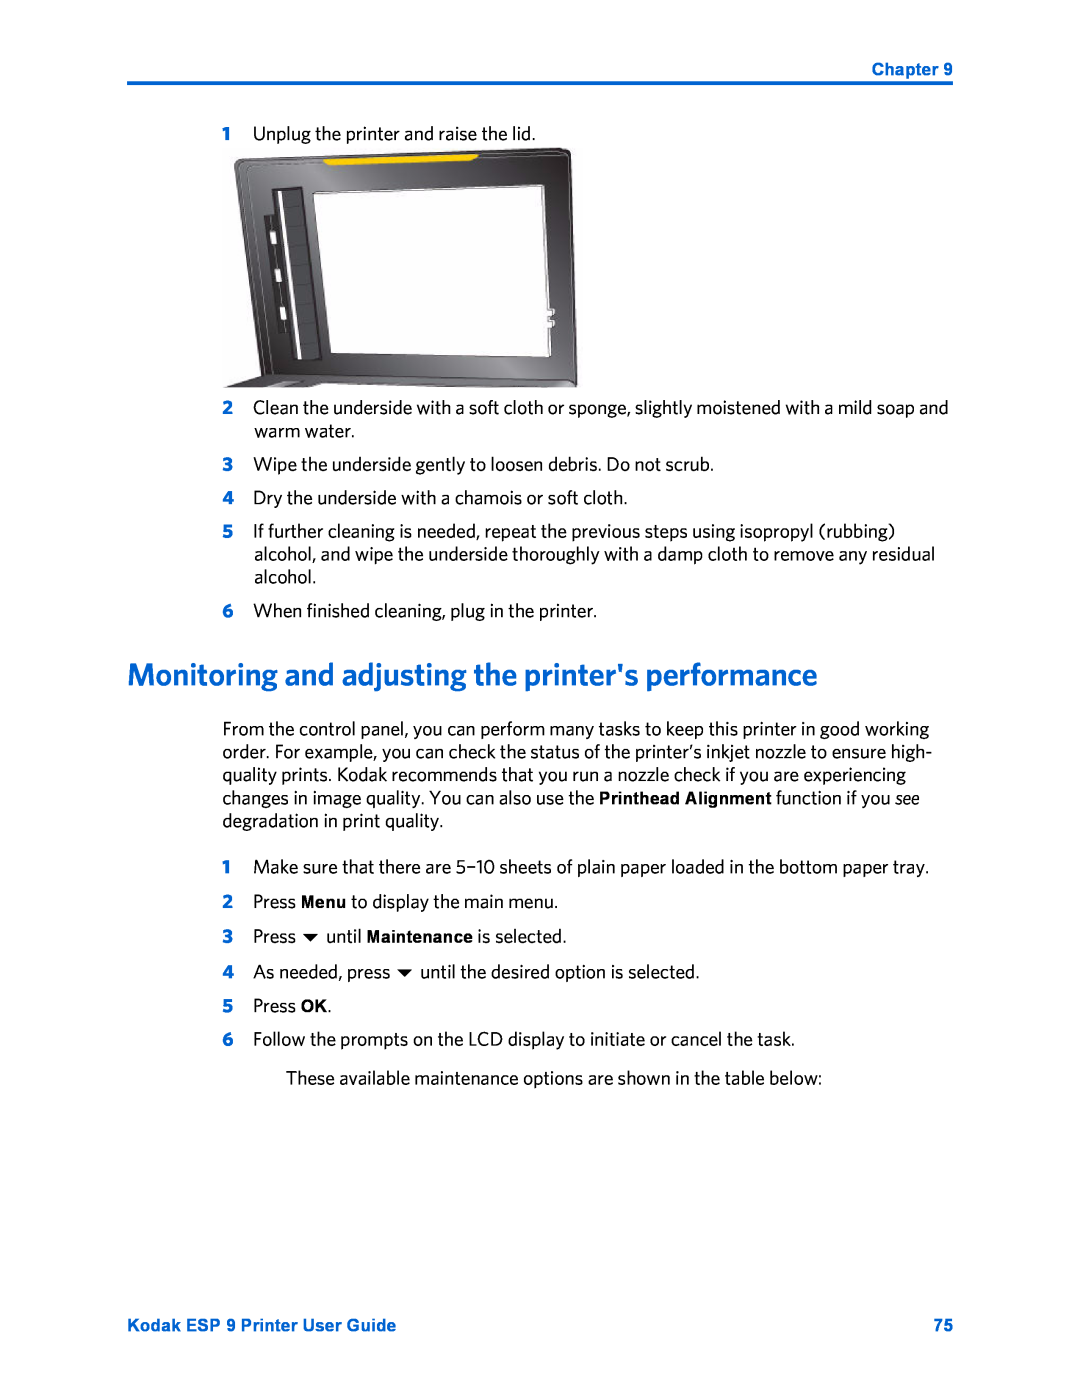 Kodak ESP 9 manual Monitoring and adjusting the printers performance, until the desired option is selected 